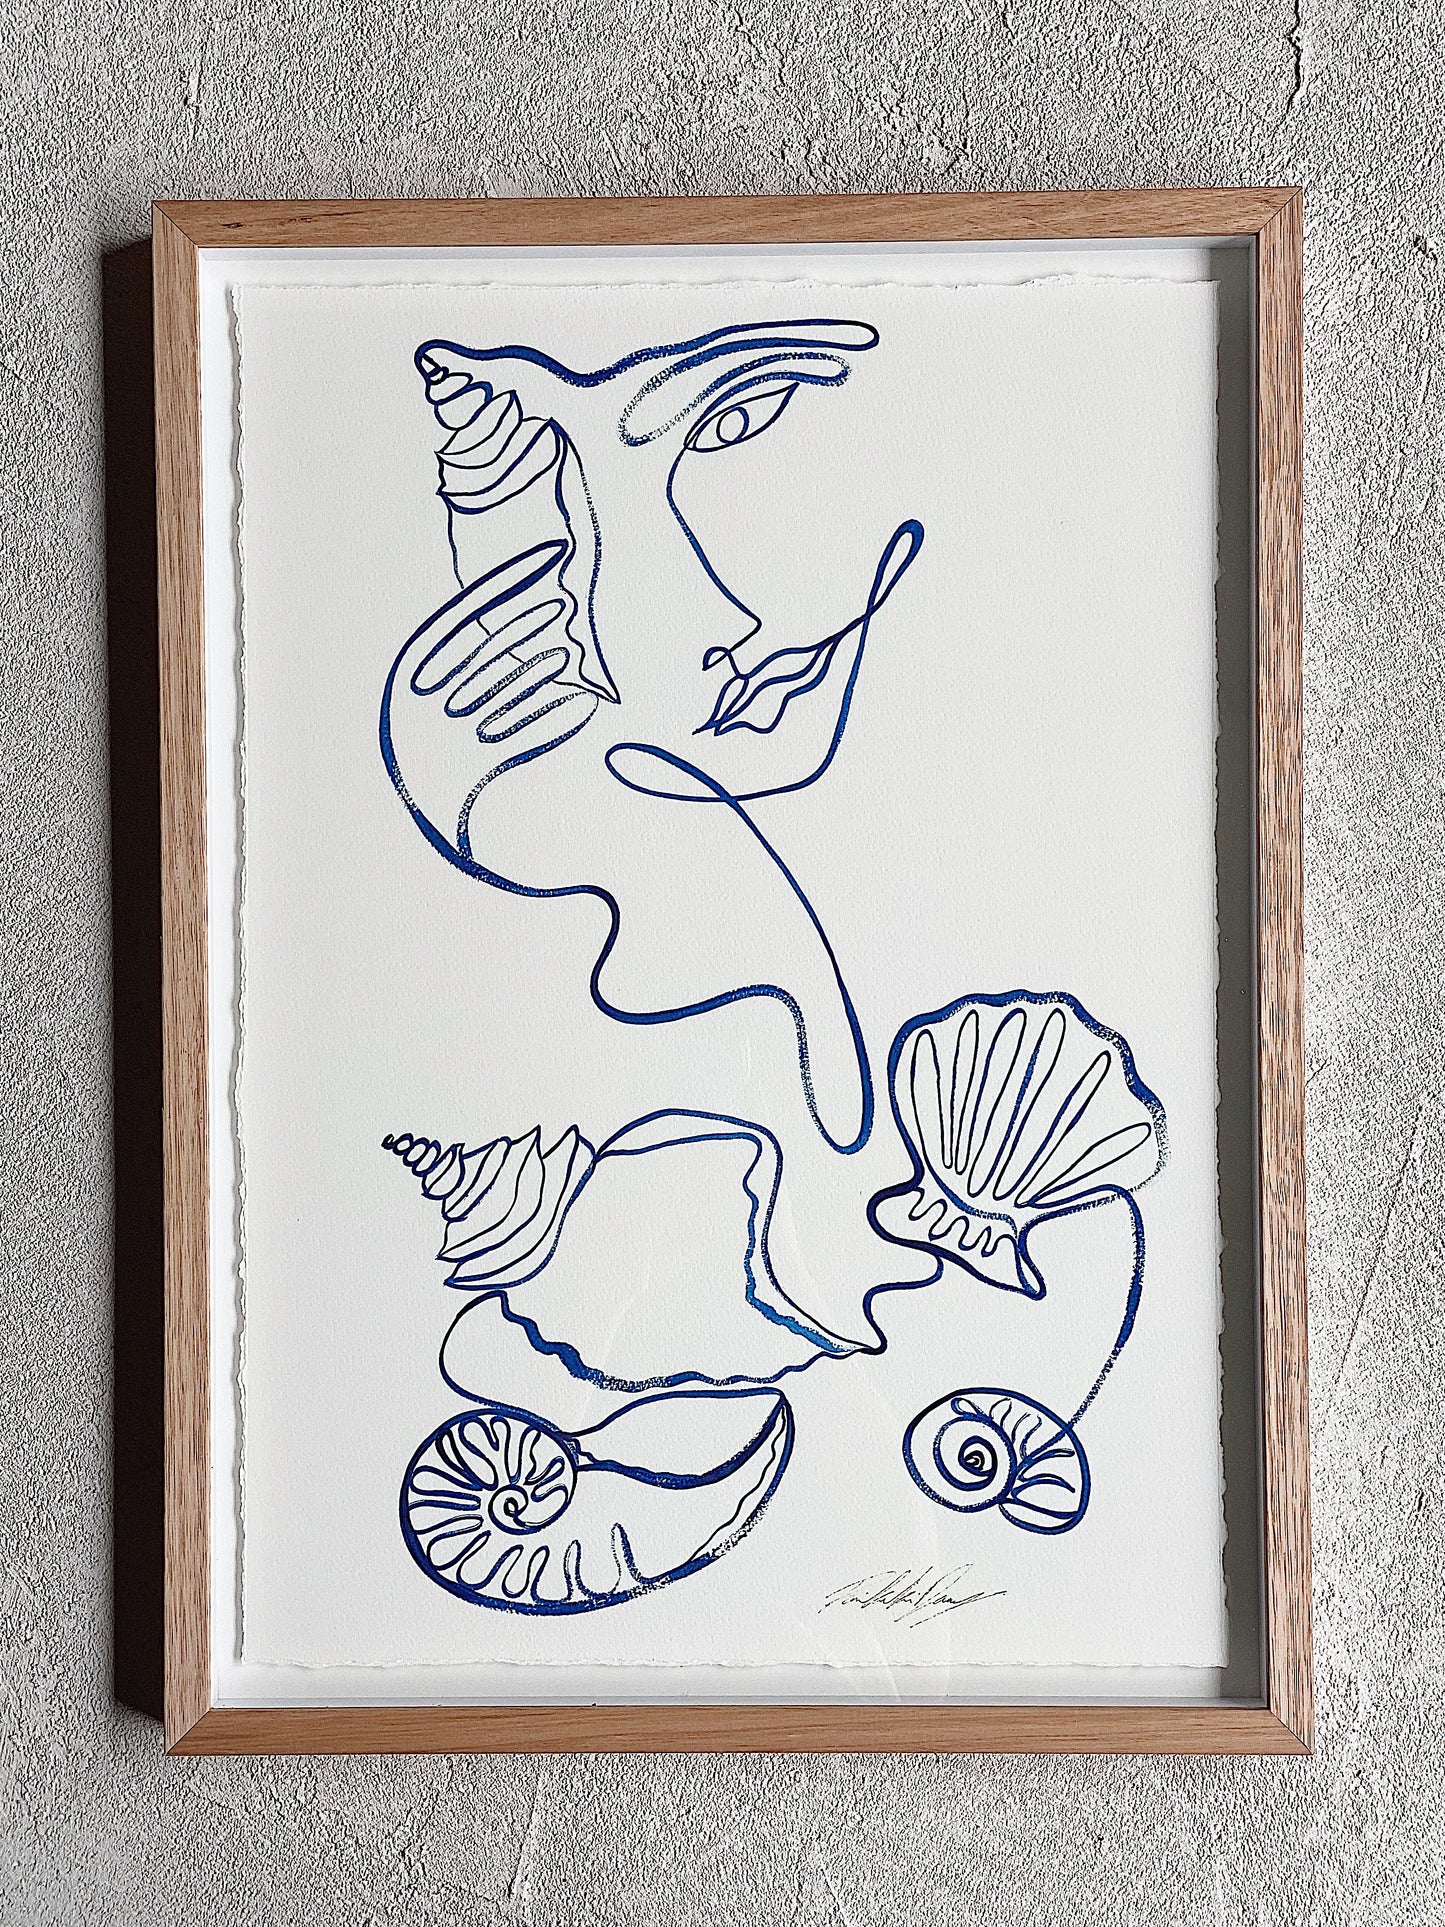 “Call Me On My Shell Phone” By Rikki Day ~ Float framed in Tasmanian Oak, limited edition